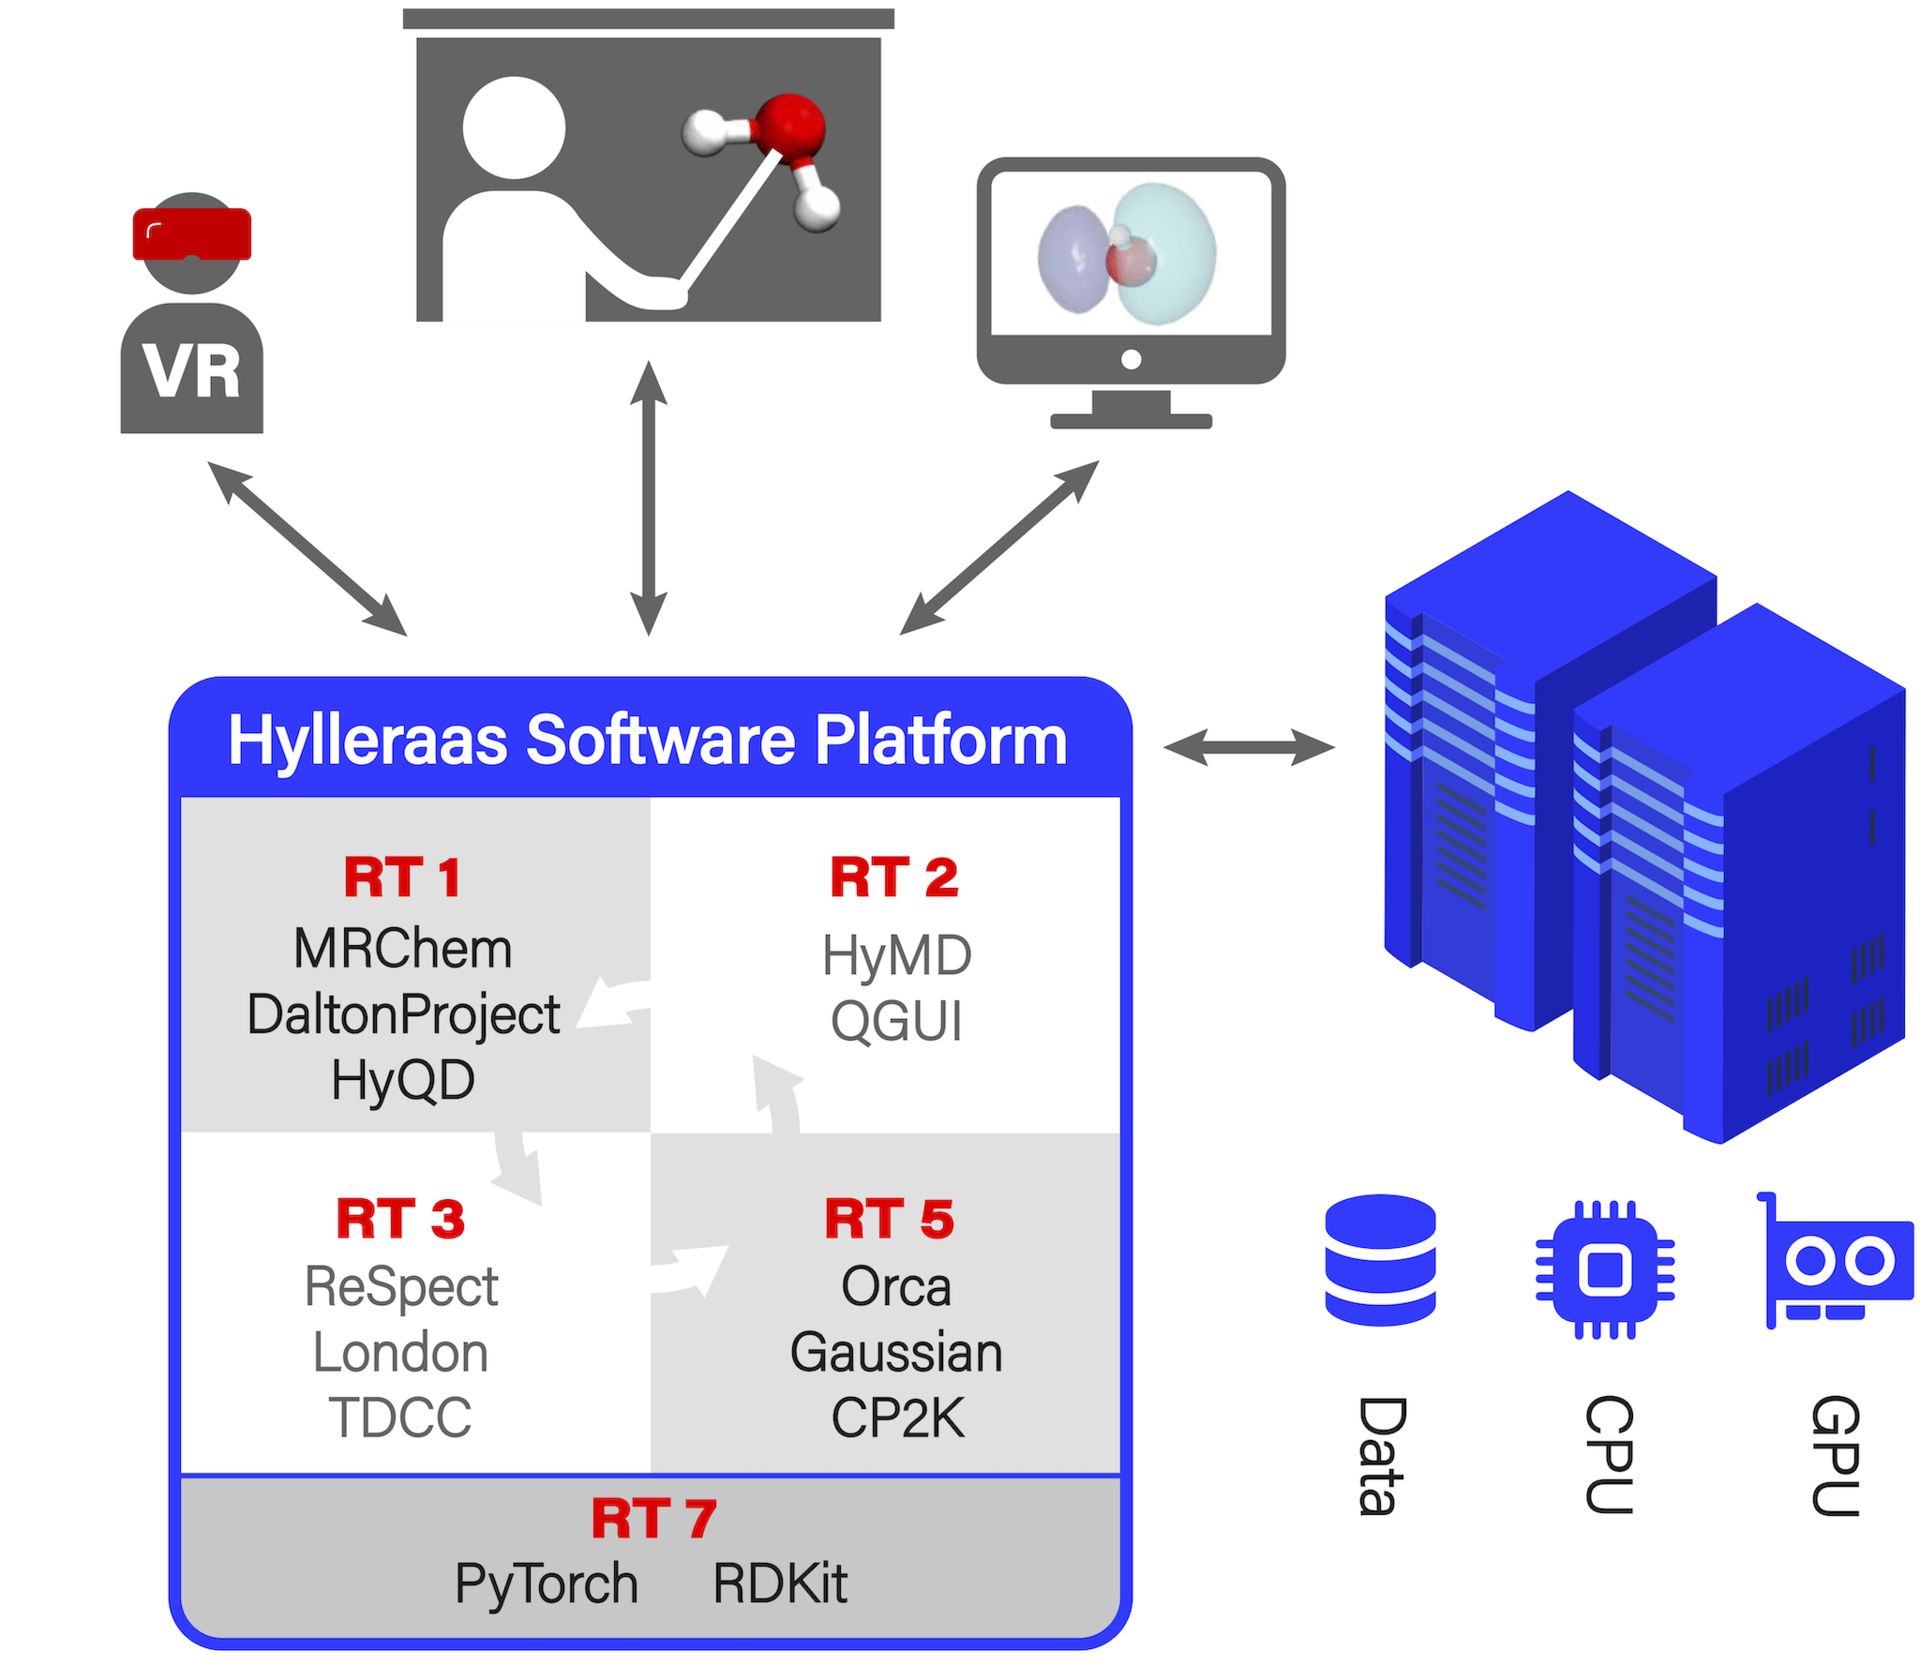 Graphical illustration of the research group "Hylleraas Software Platform"